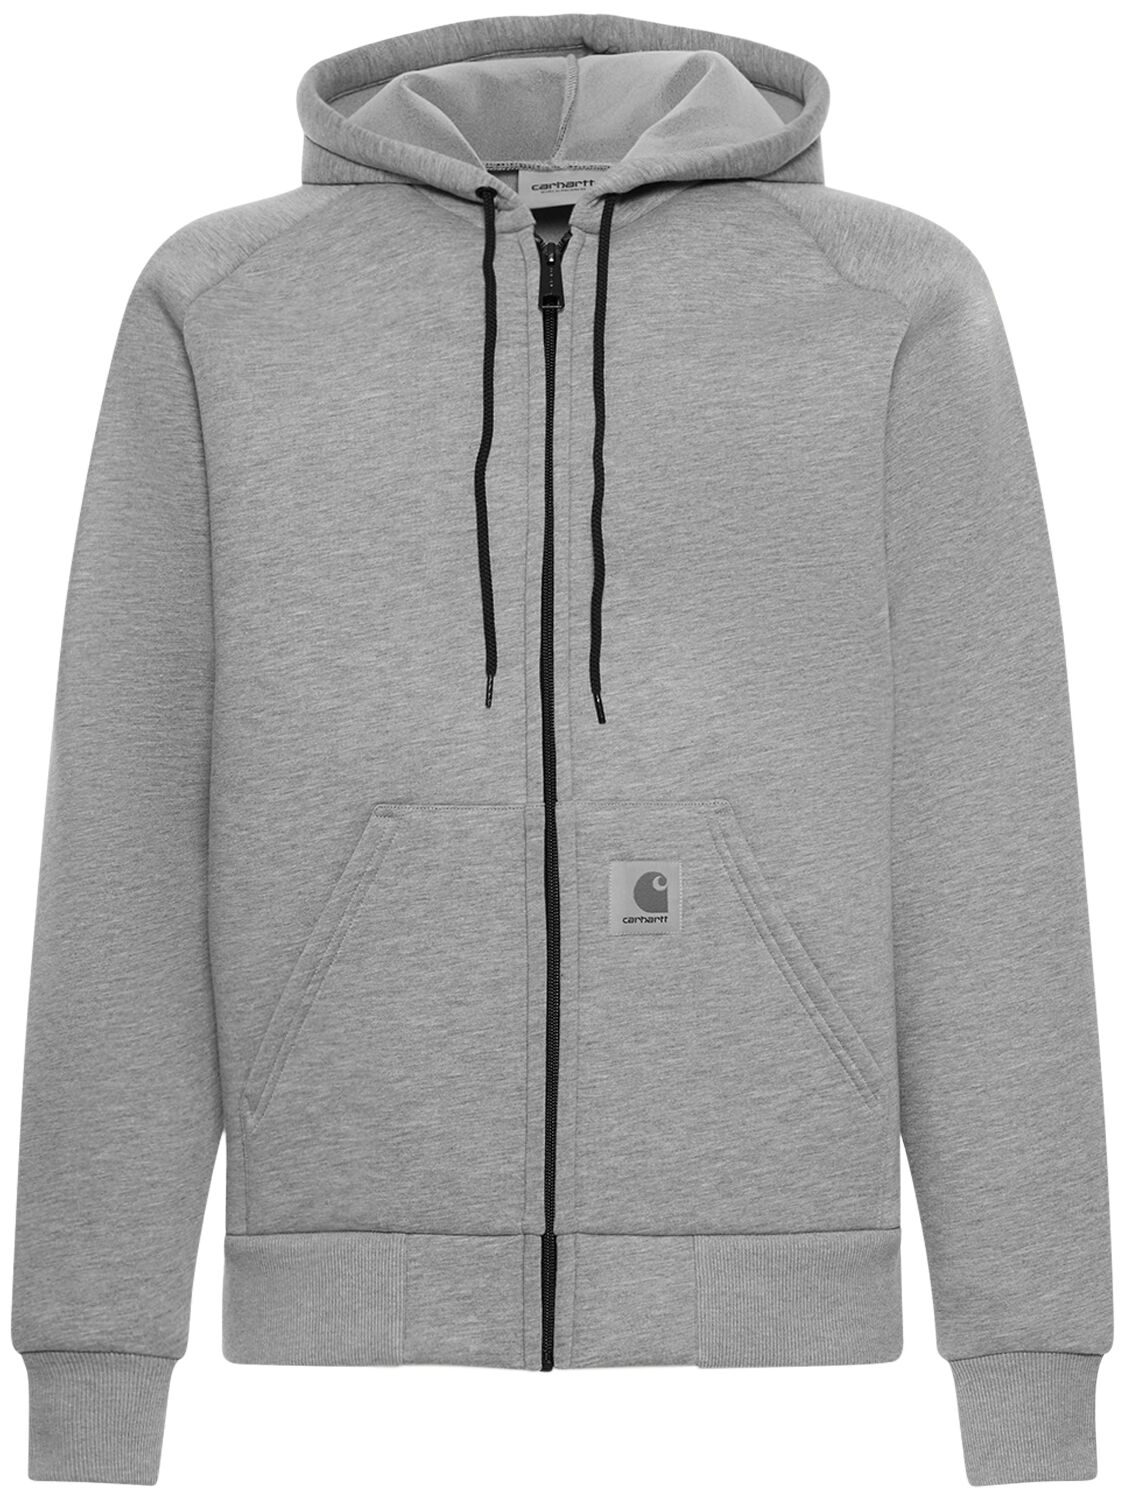 Image of Car-lux Cotton Blend Hooded Jacket